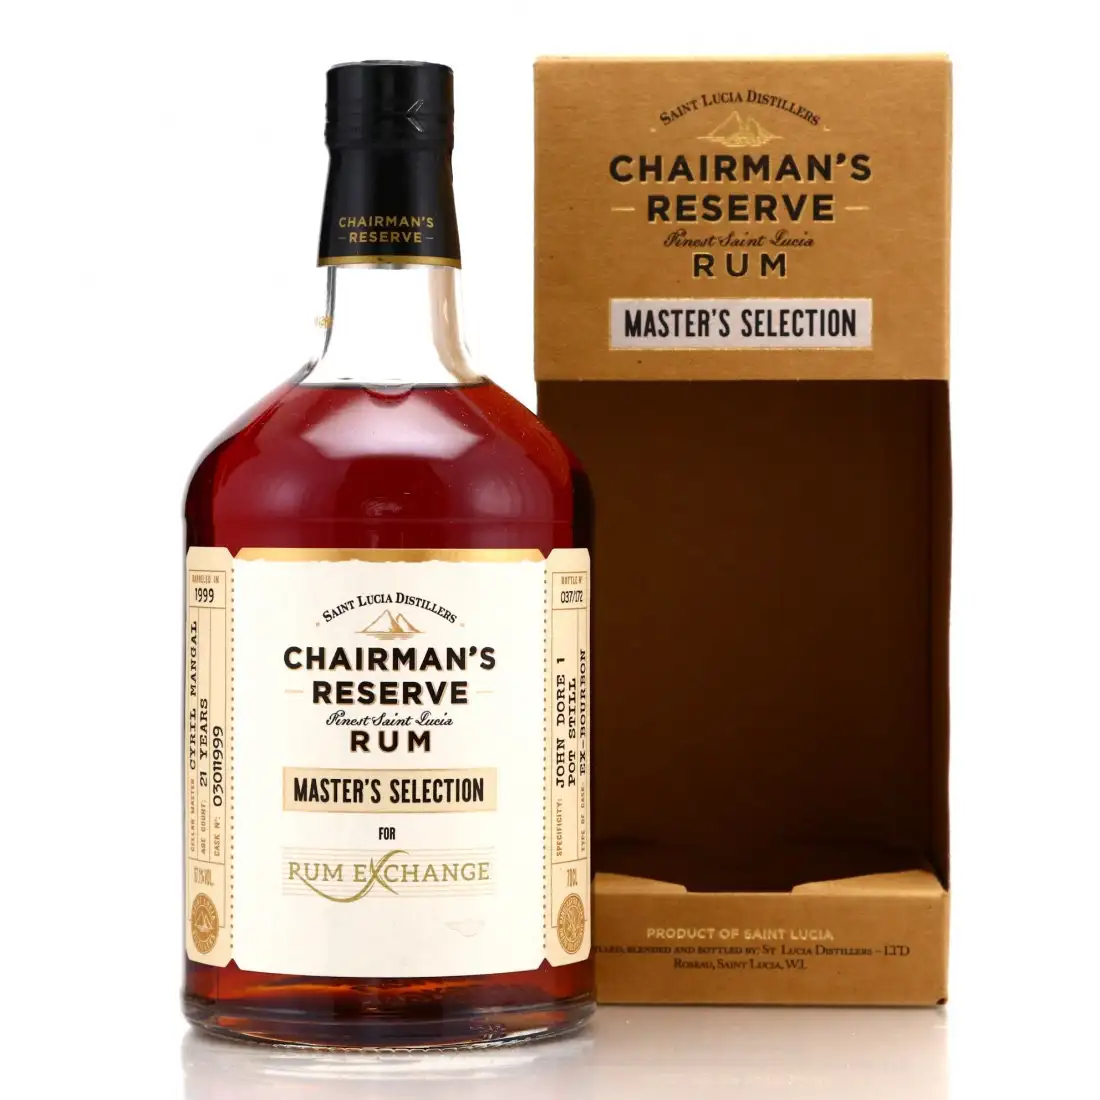 Image of the front of the bottle of the rum Chairman‘s Reserve Master's Selection (Rum Exchange)